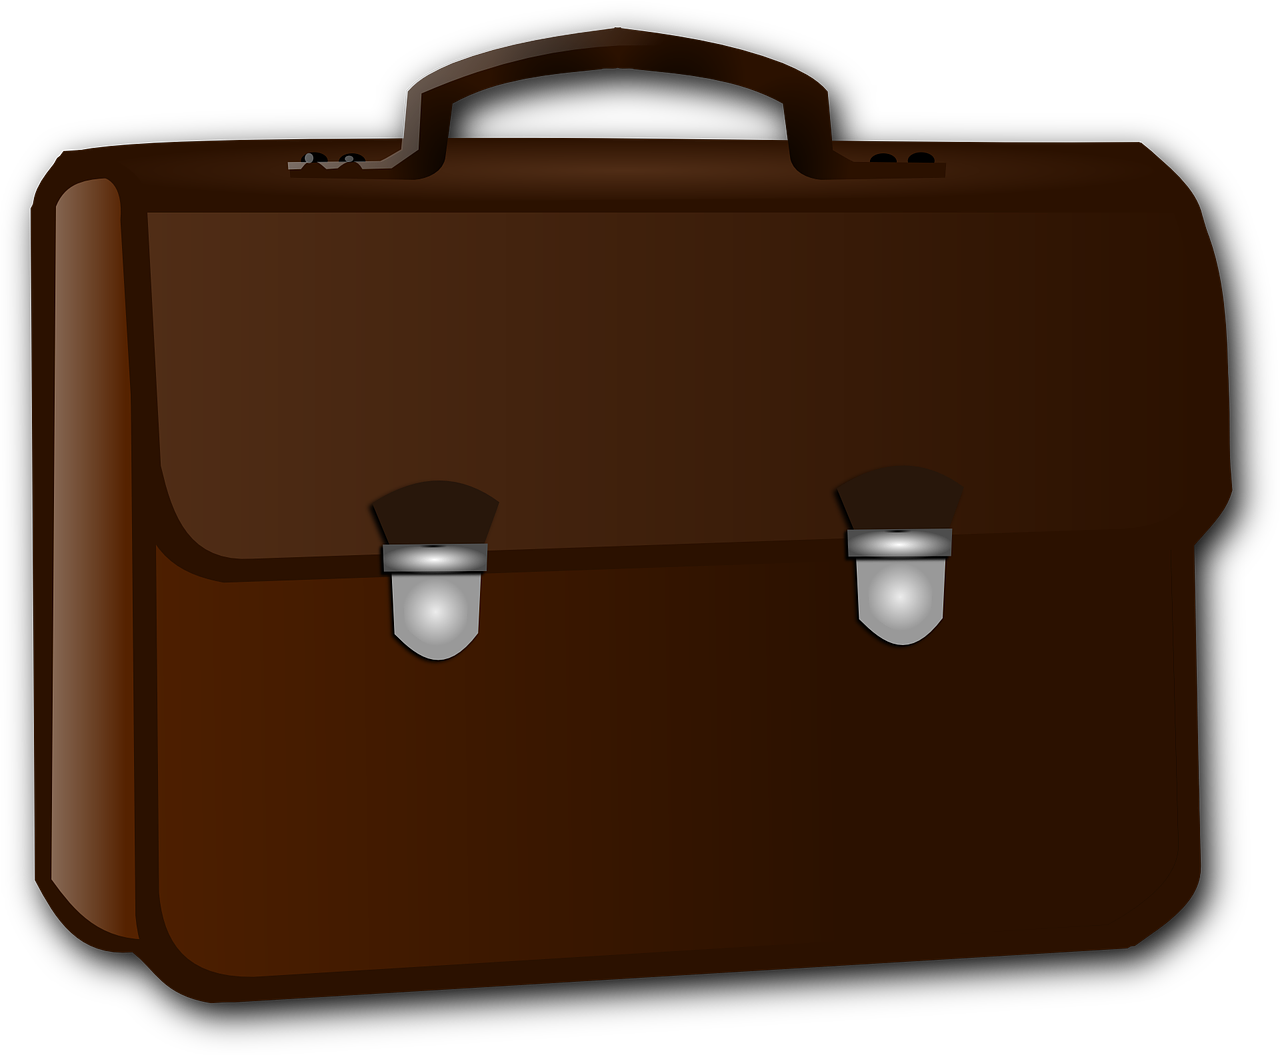 Leather Briefcase Png Image Free Download Dwpng Com - vrogue.co